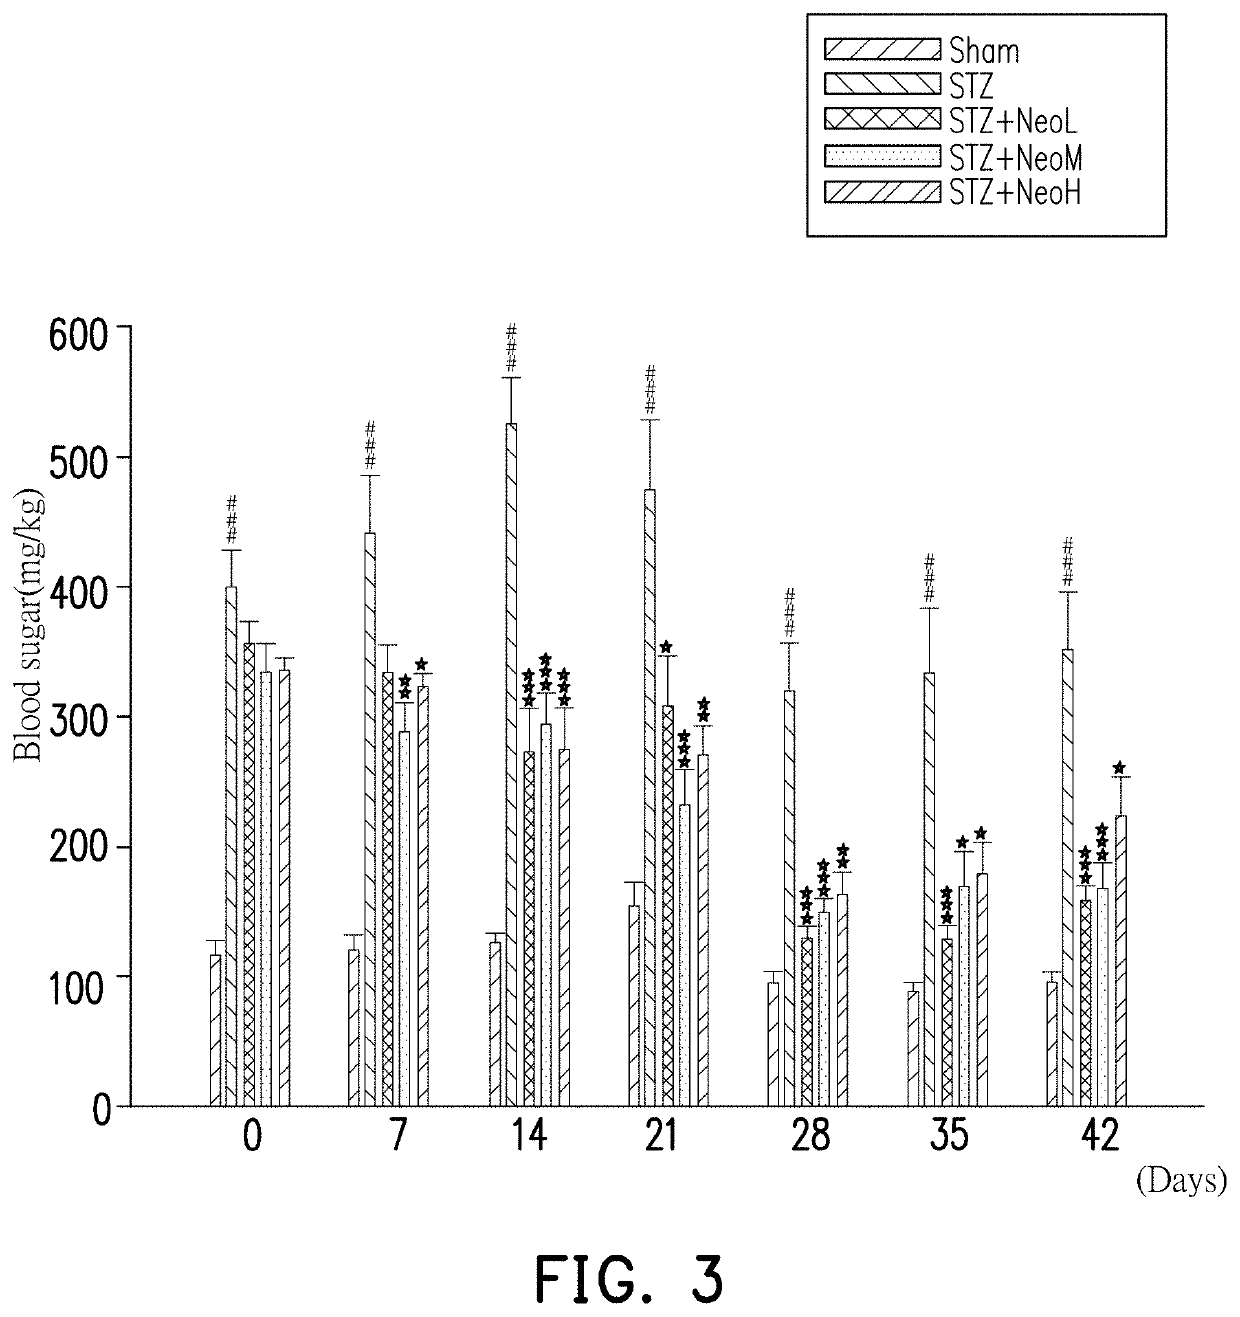 Method of using Neoandrographolide for lowering blood sugar, lowering blood lipid, improving liver function and improving renal function